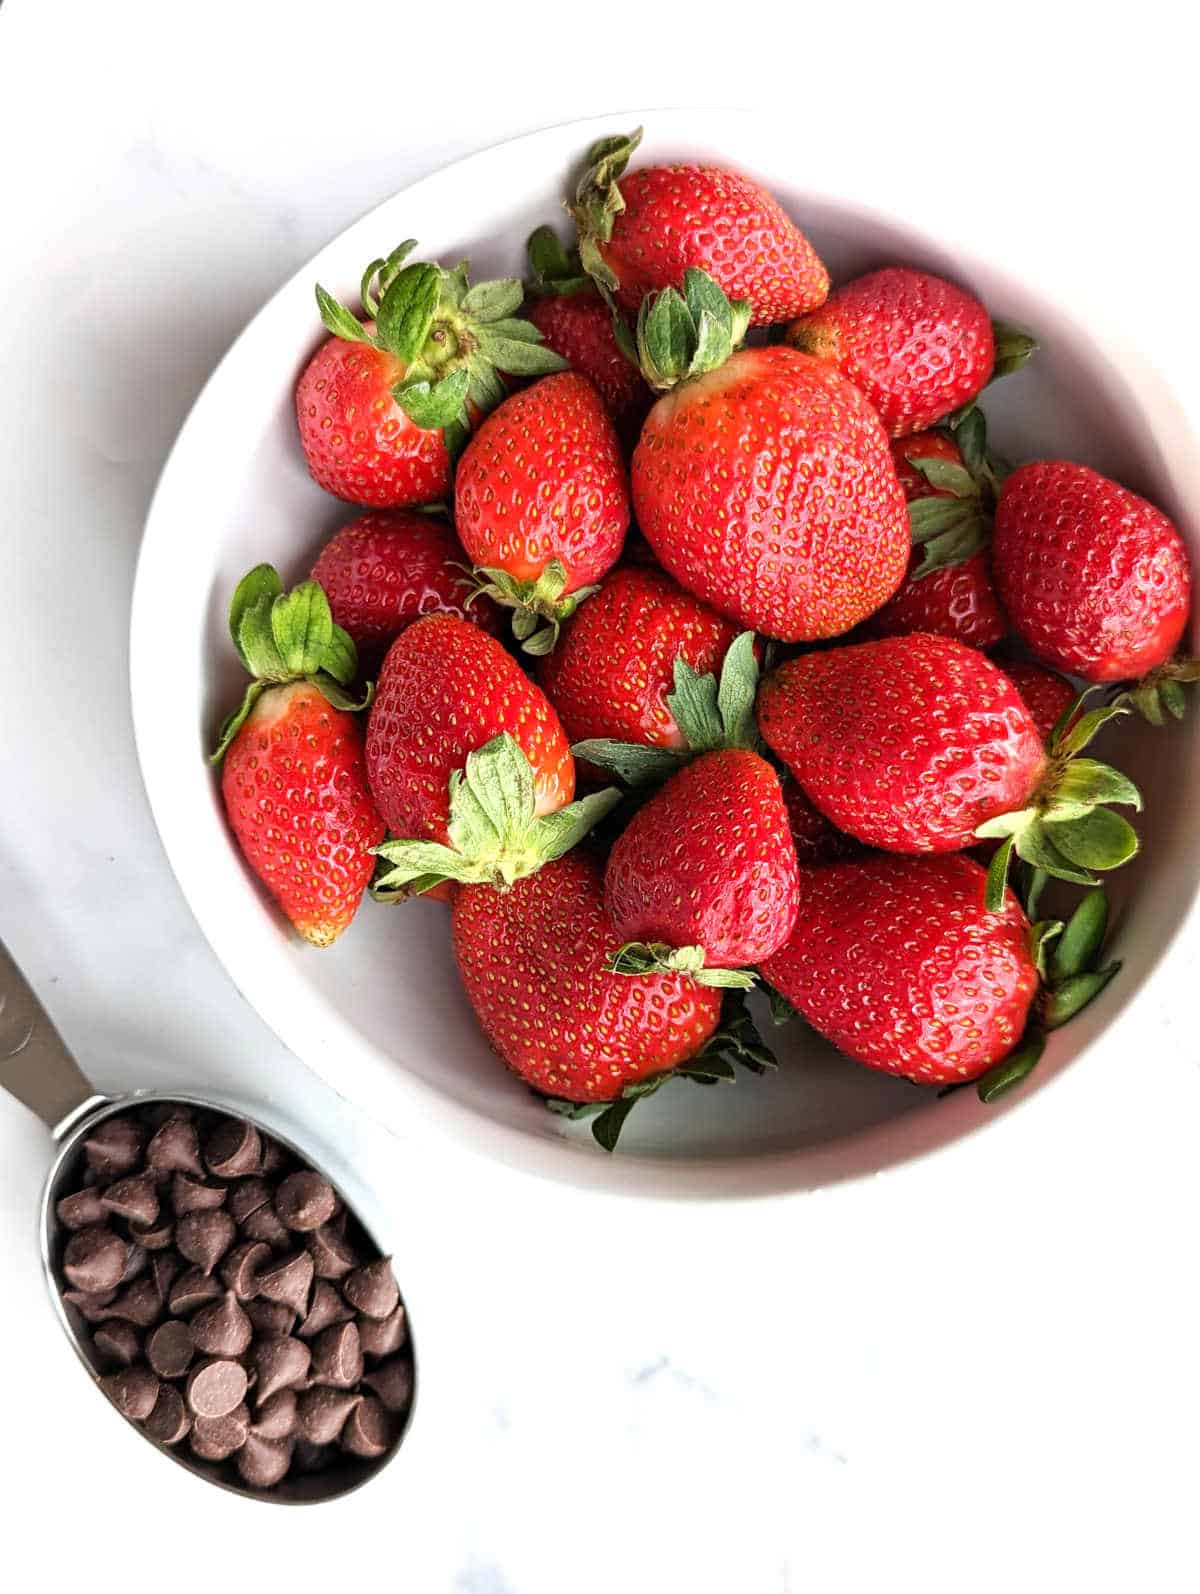 Fresh strawberries in a bowl beside a measuring cup full of dairy-free chocolate chips.